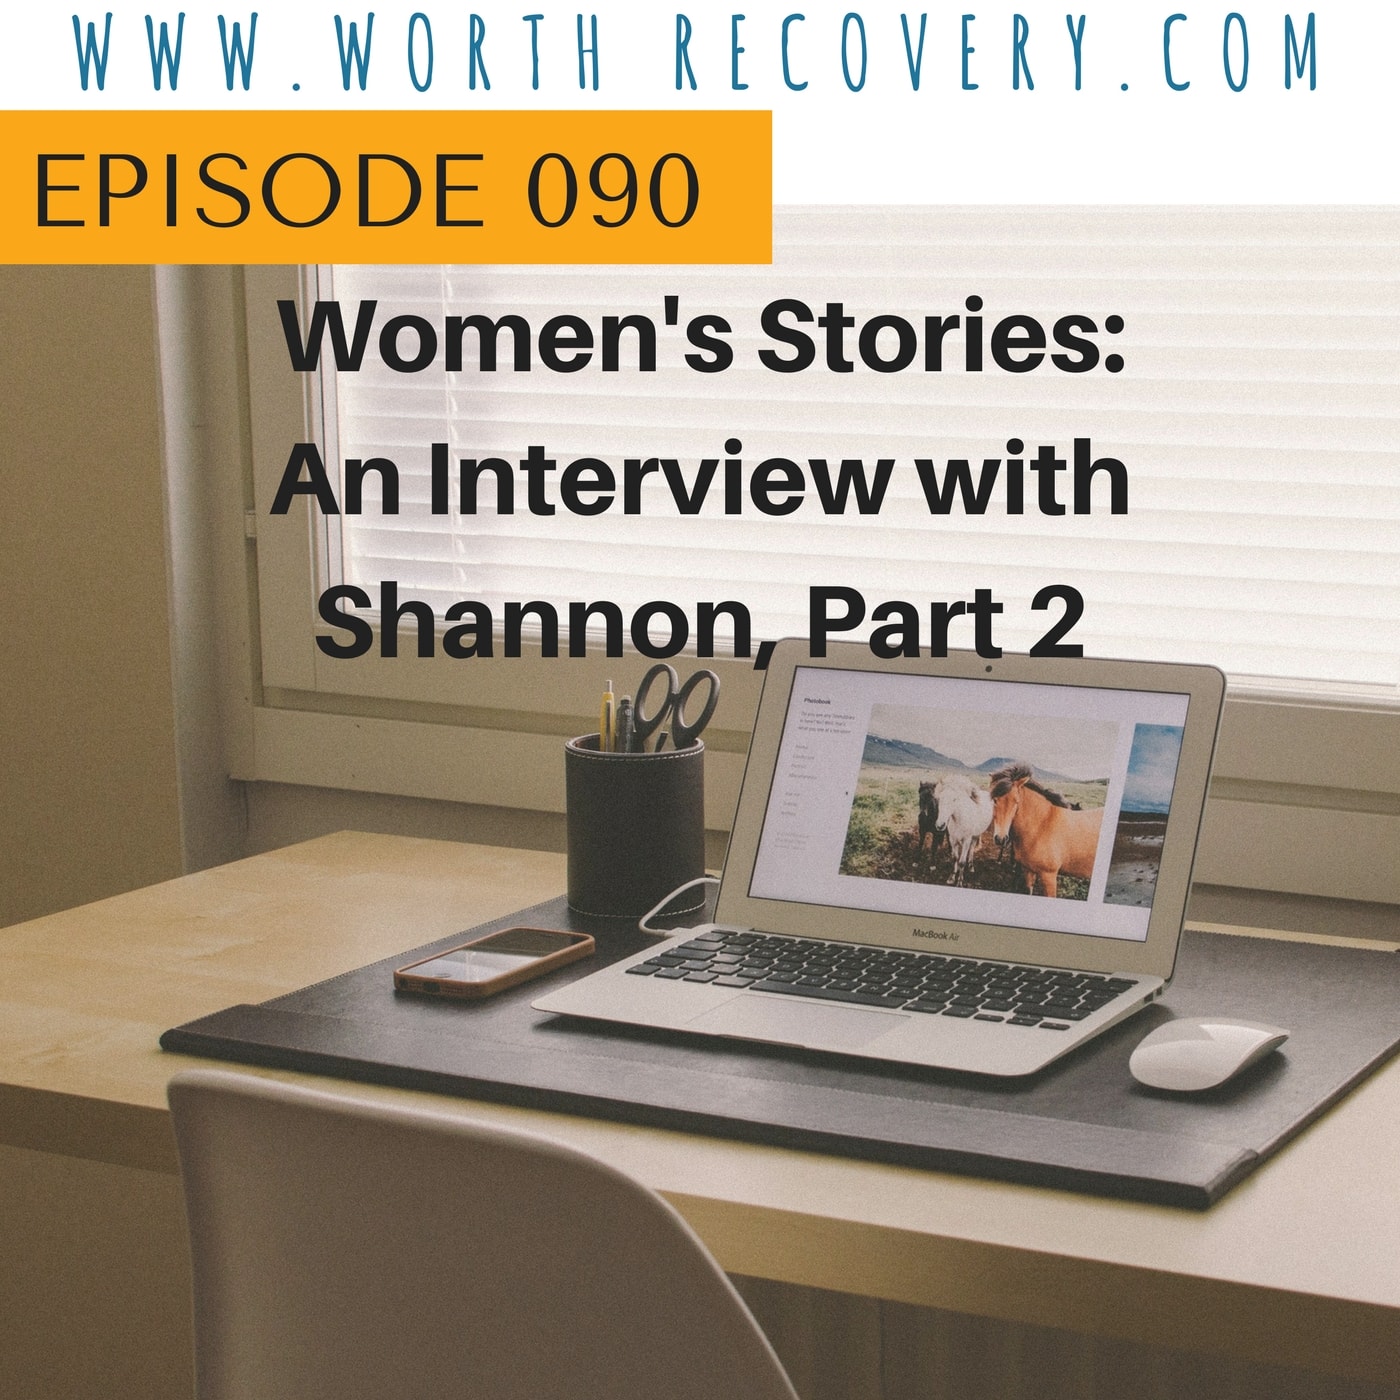 Episode 090: Women's Stories - An Interview with Shannon, Part 2